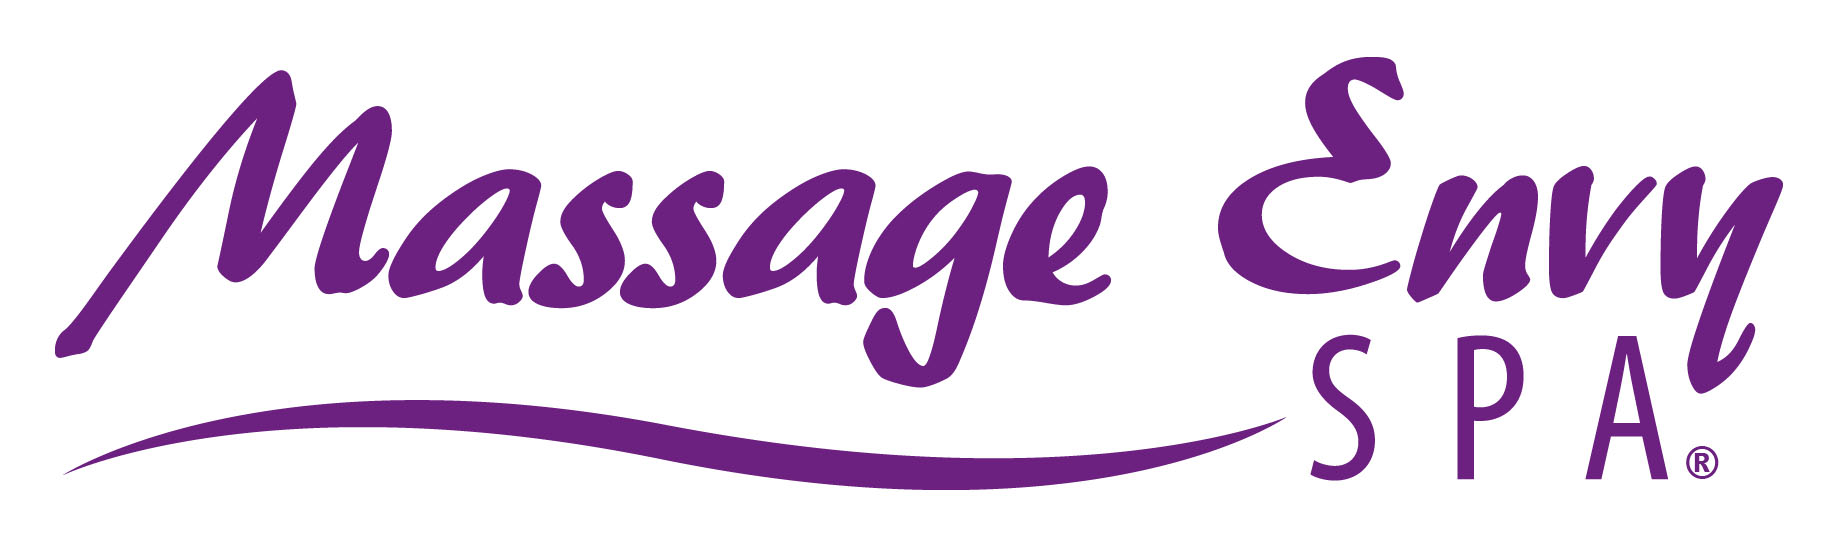 Massage Envy Spa Launches Sweepstakes to Help People Achieve New Year's Wellness Goals, MASSAGE Magazine